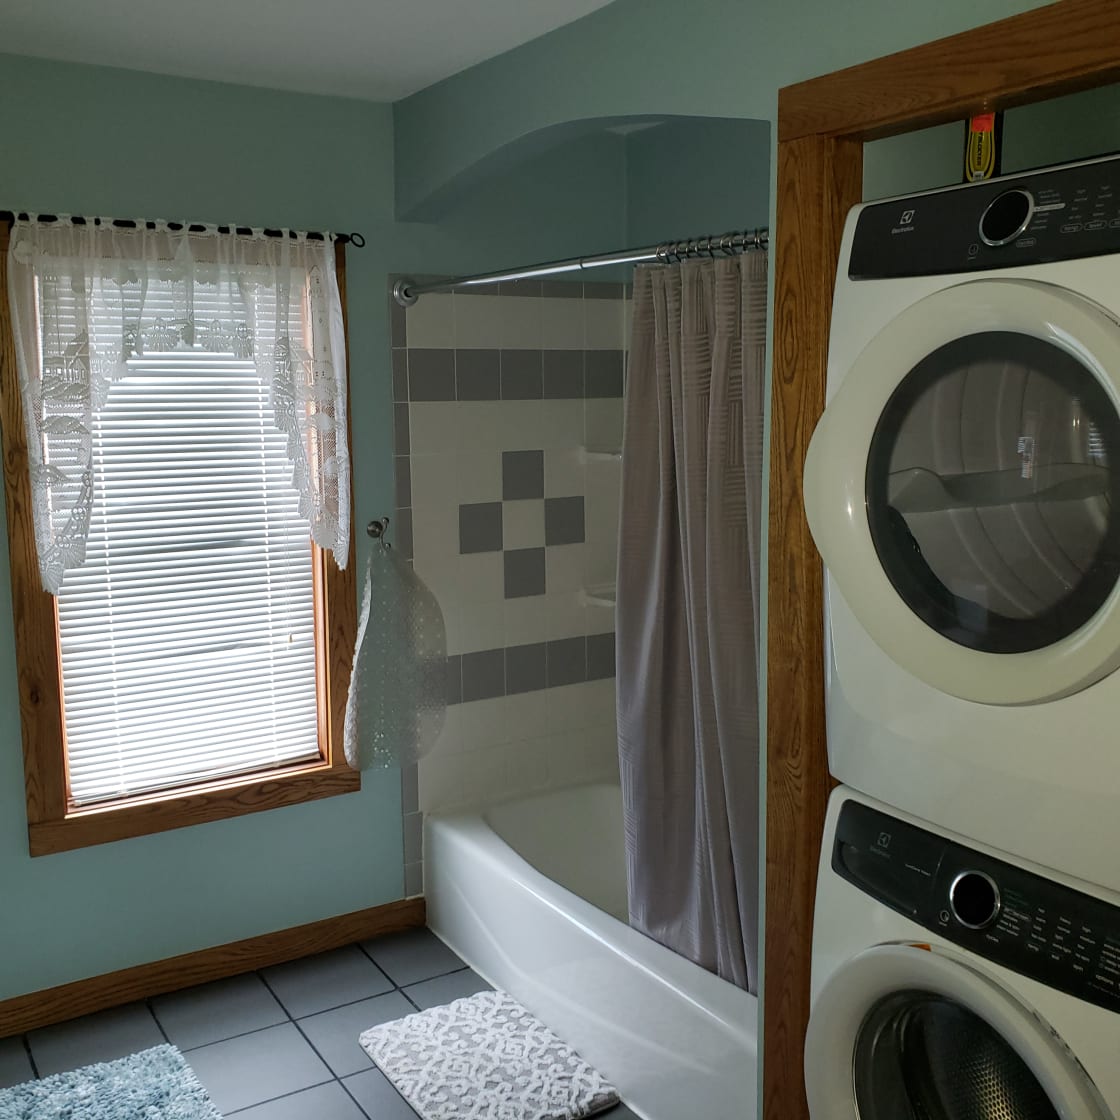 Tub shower and stacked washer/dryer